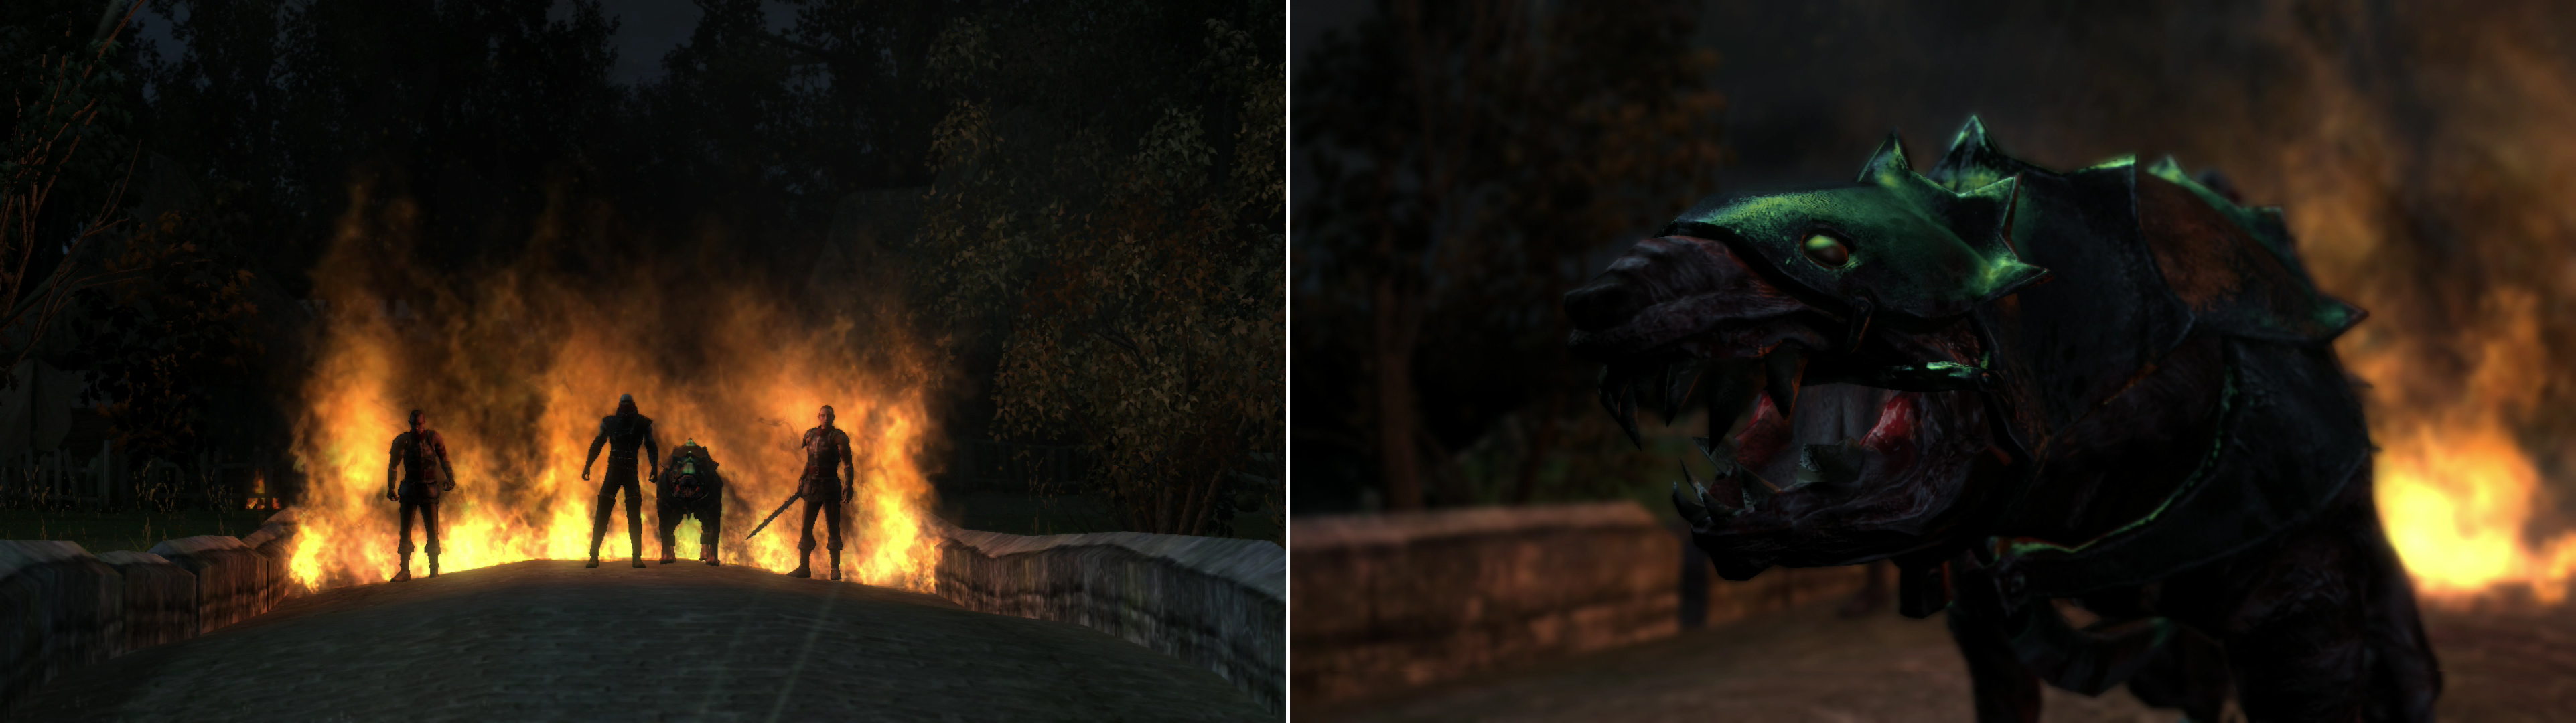 On the Merchant's Bridge you'll be ambushed by Salamandra (left) and if you killed the Frightener during the Prologue, you'll get unsettling evidence about how they're using the stolen mutagens (right).